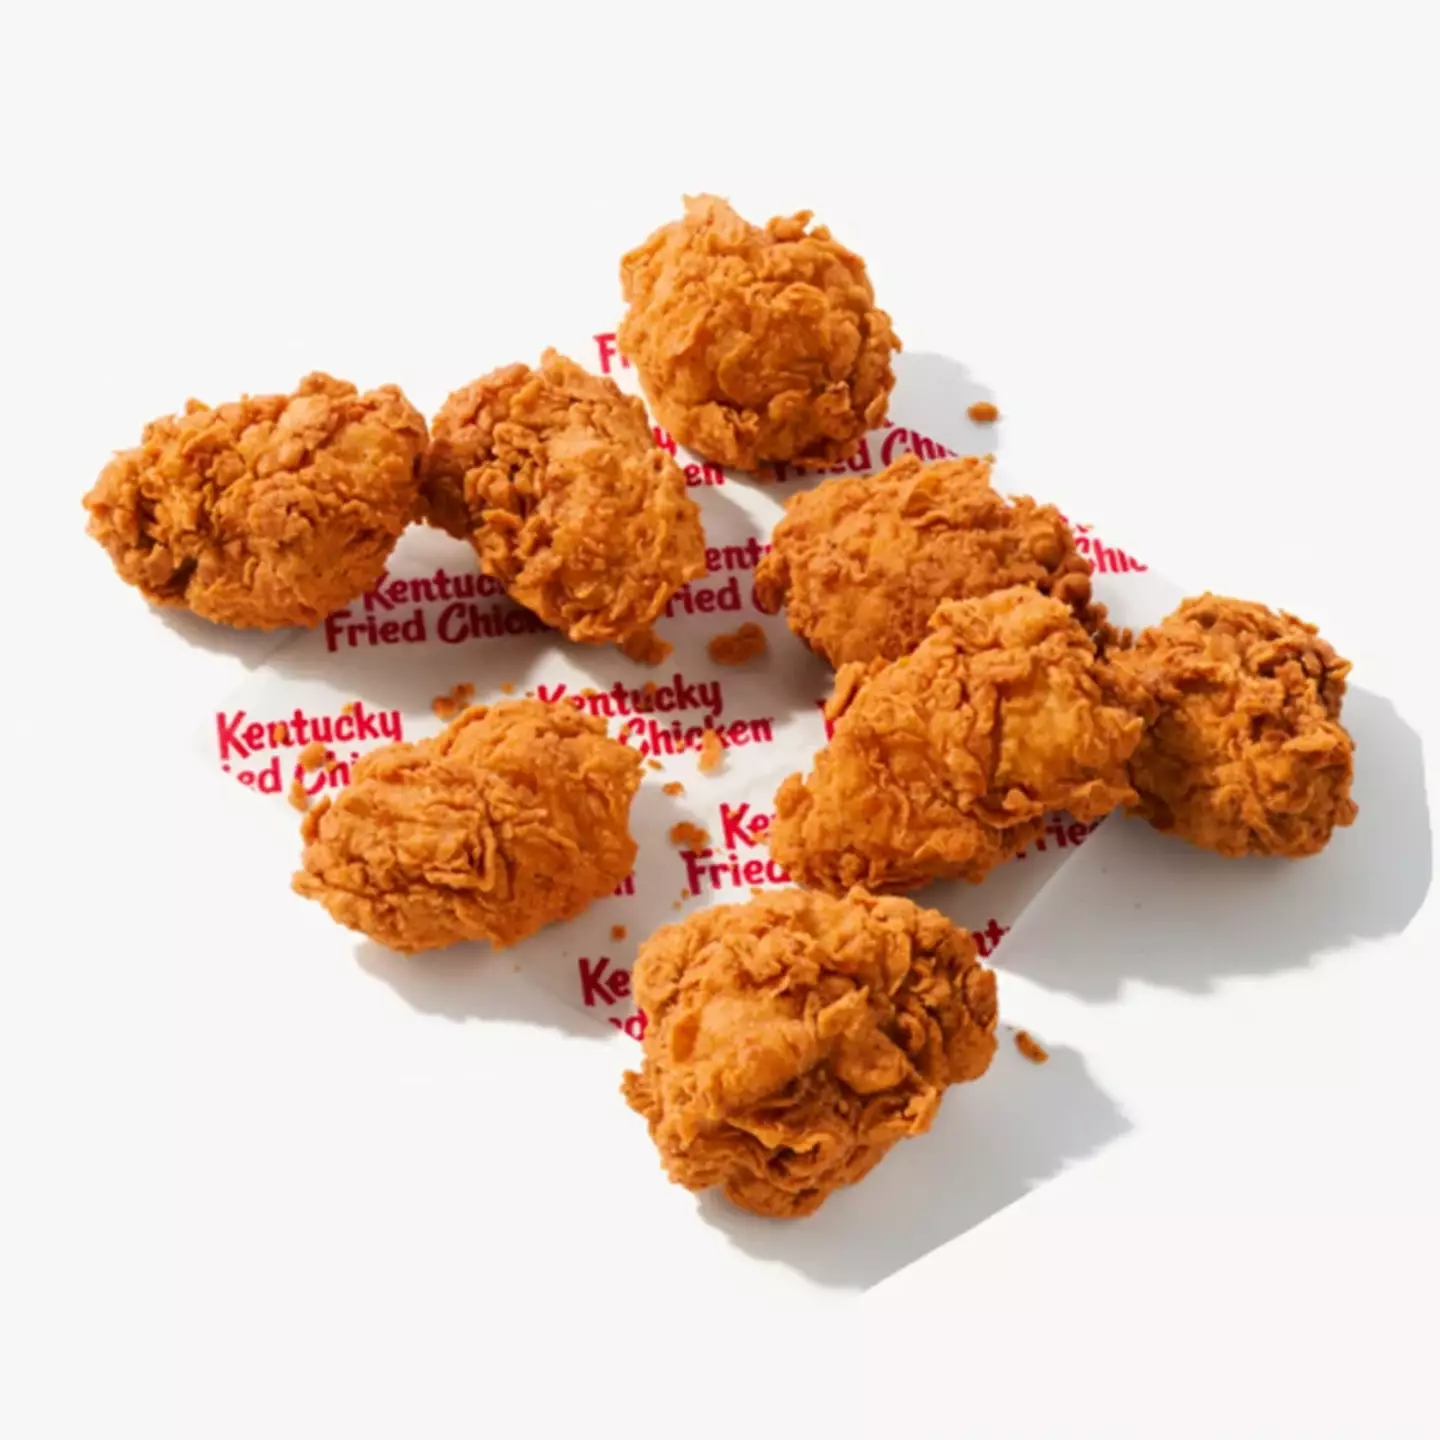 Here they are - KFC Nuggets.